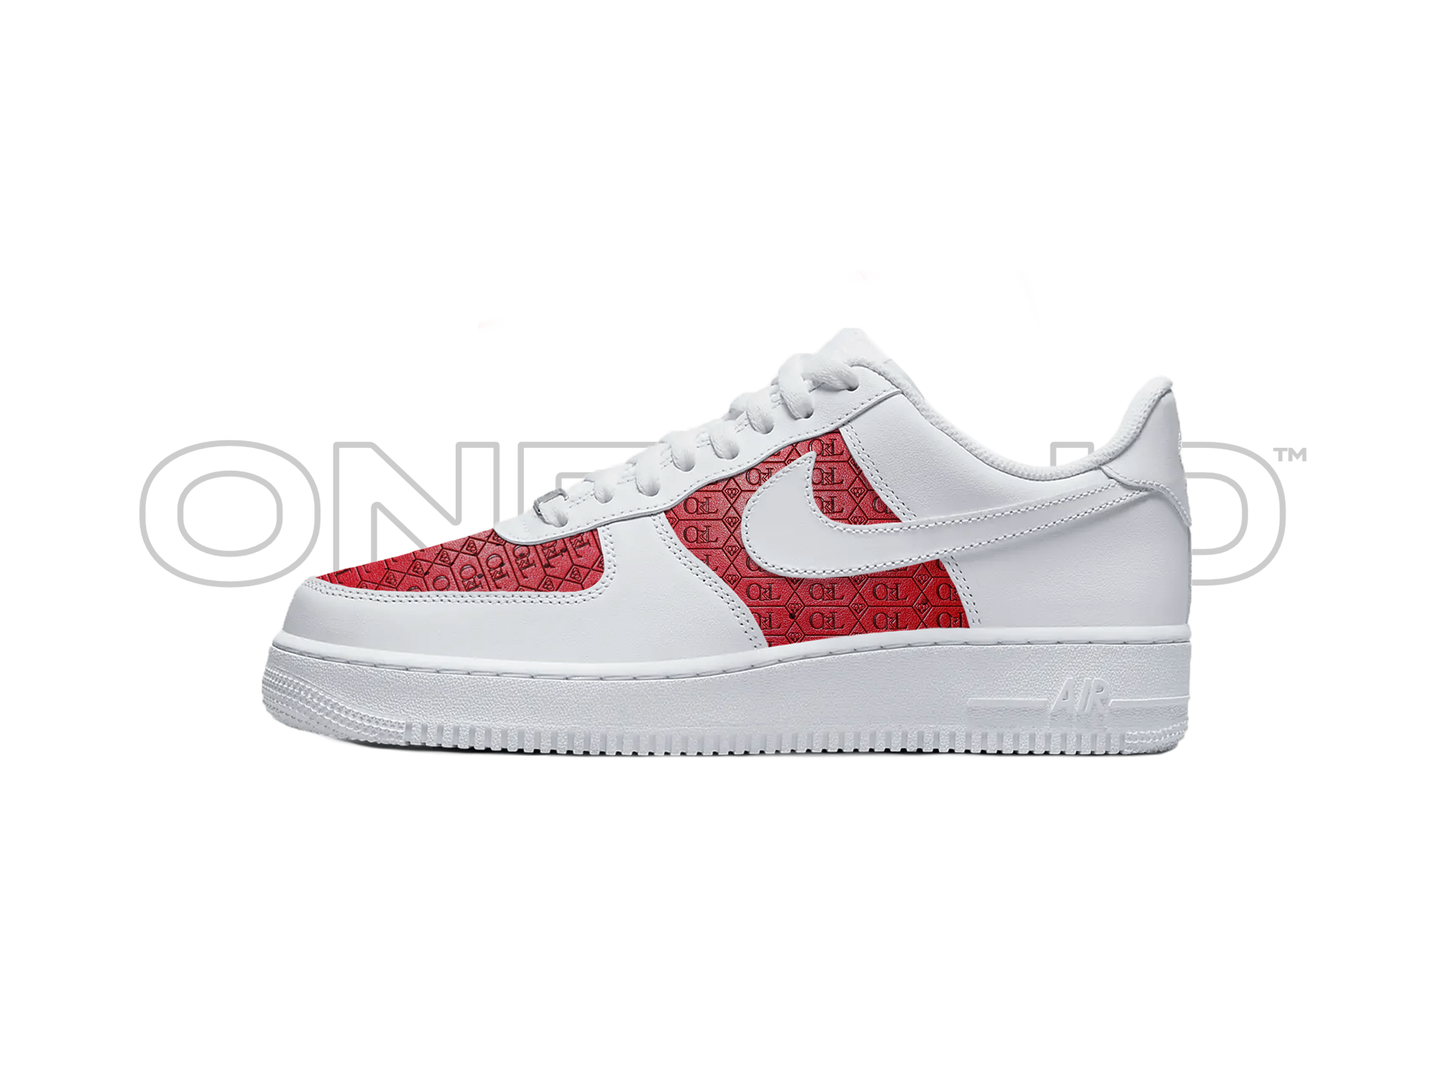 Nike AirForce 1 OKL Edition (Red & Blue)